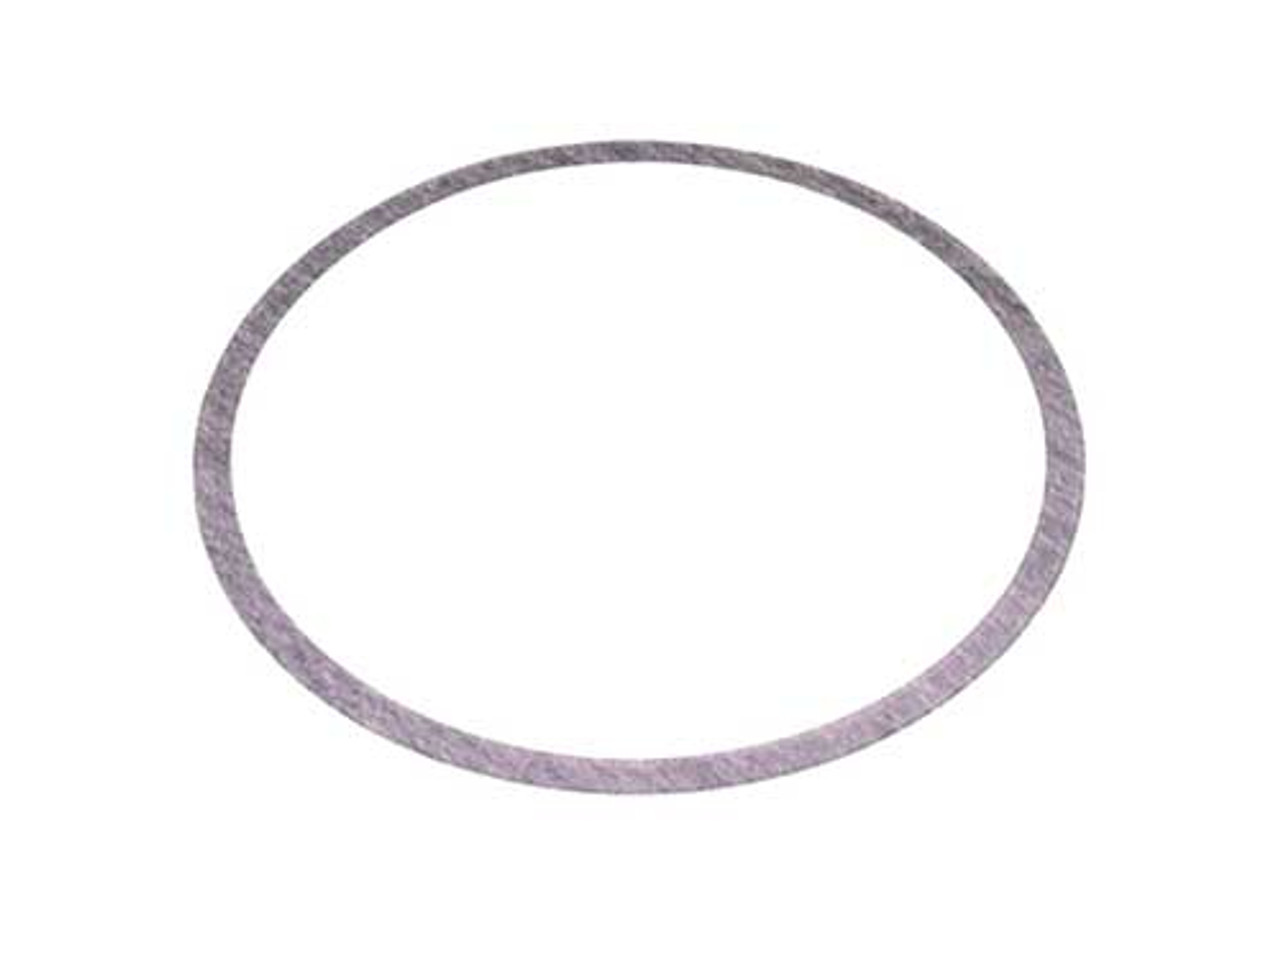 959A0063H01 - Cover Gasket 8 1/2 X 9 1/4